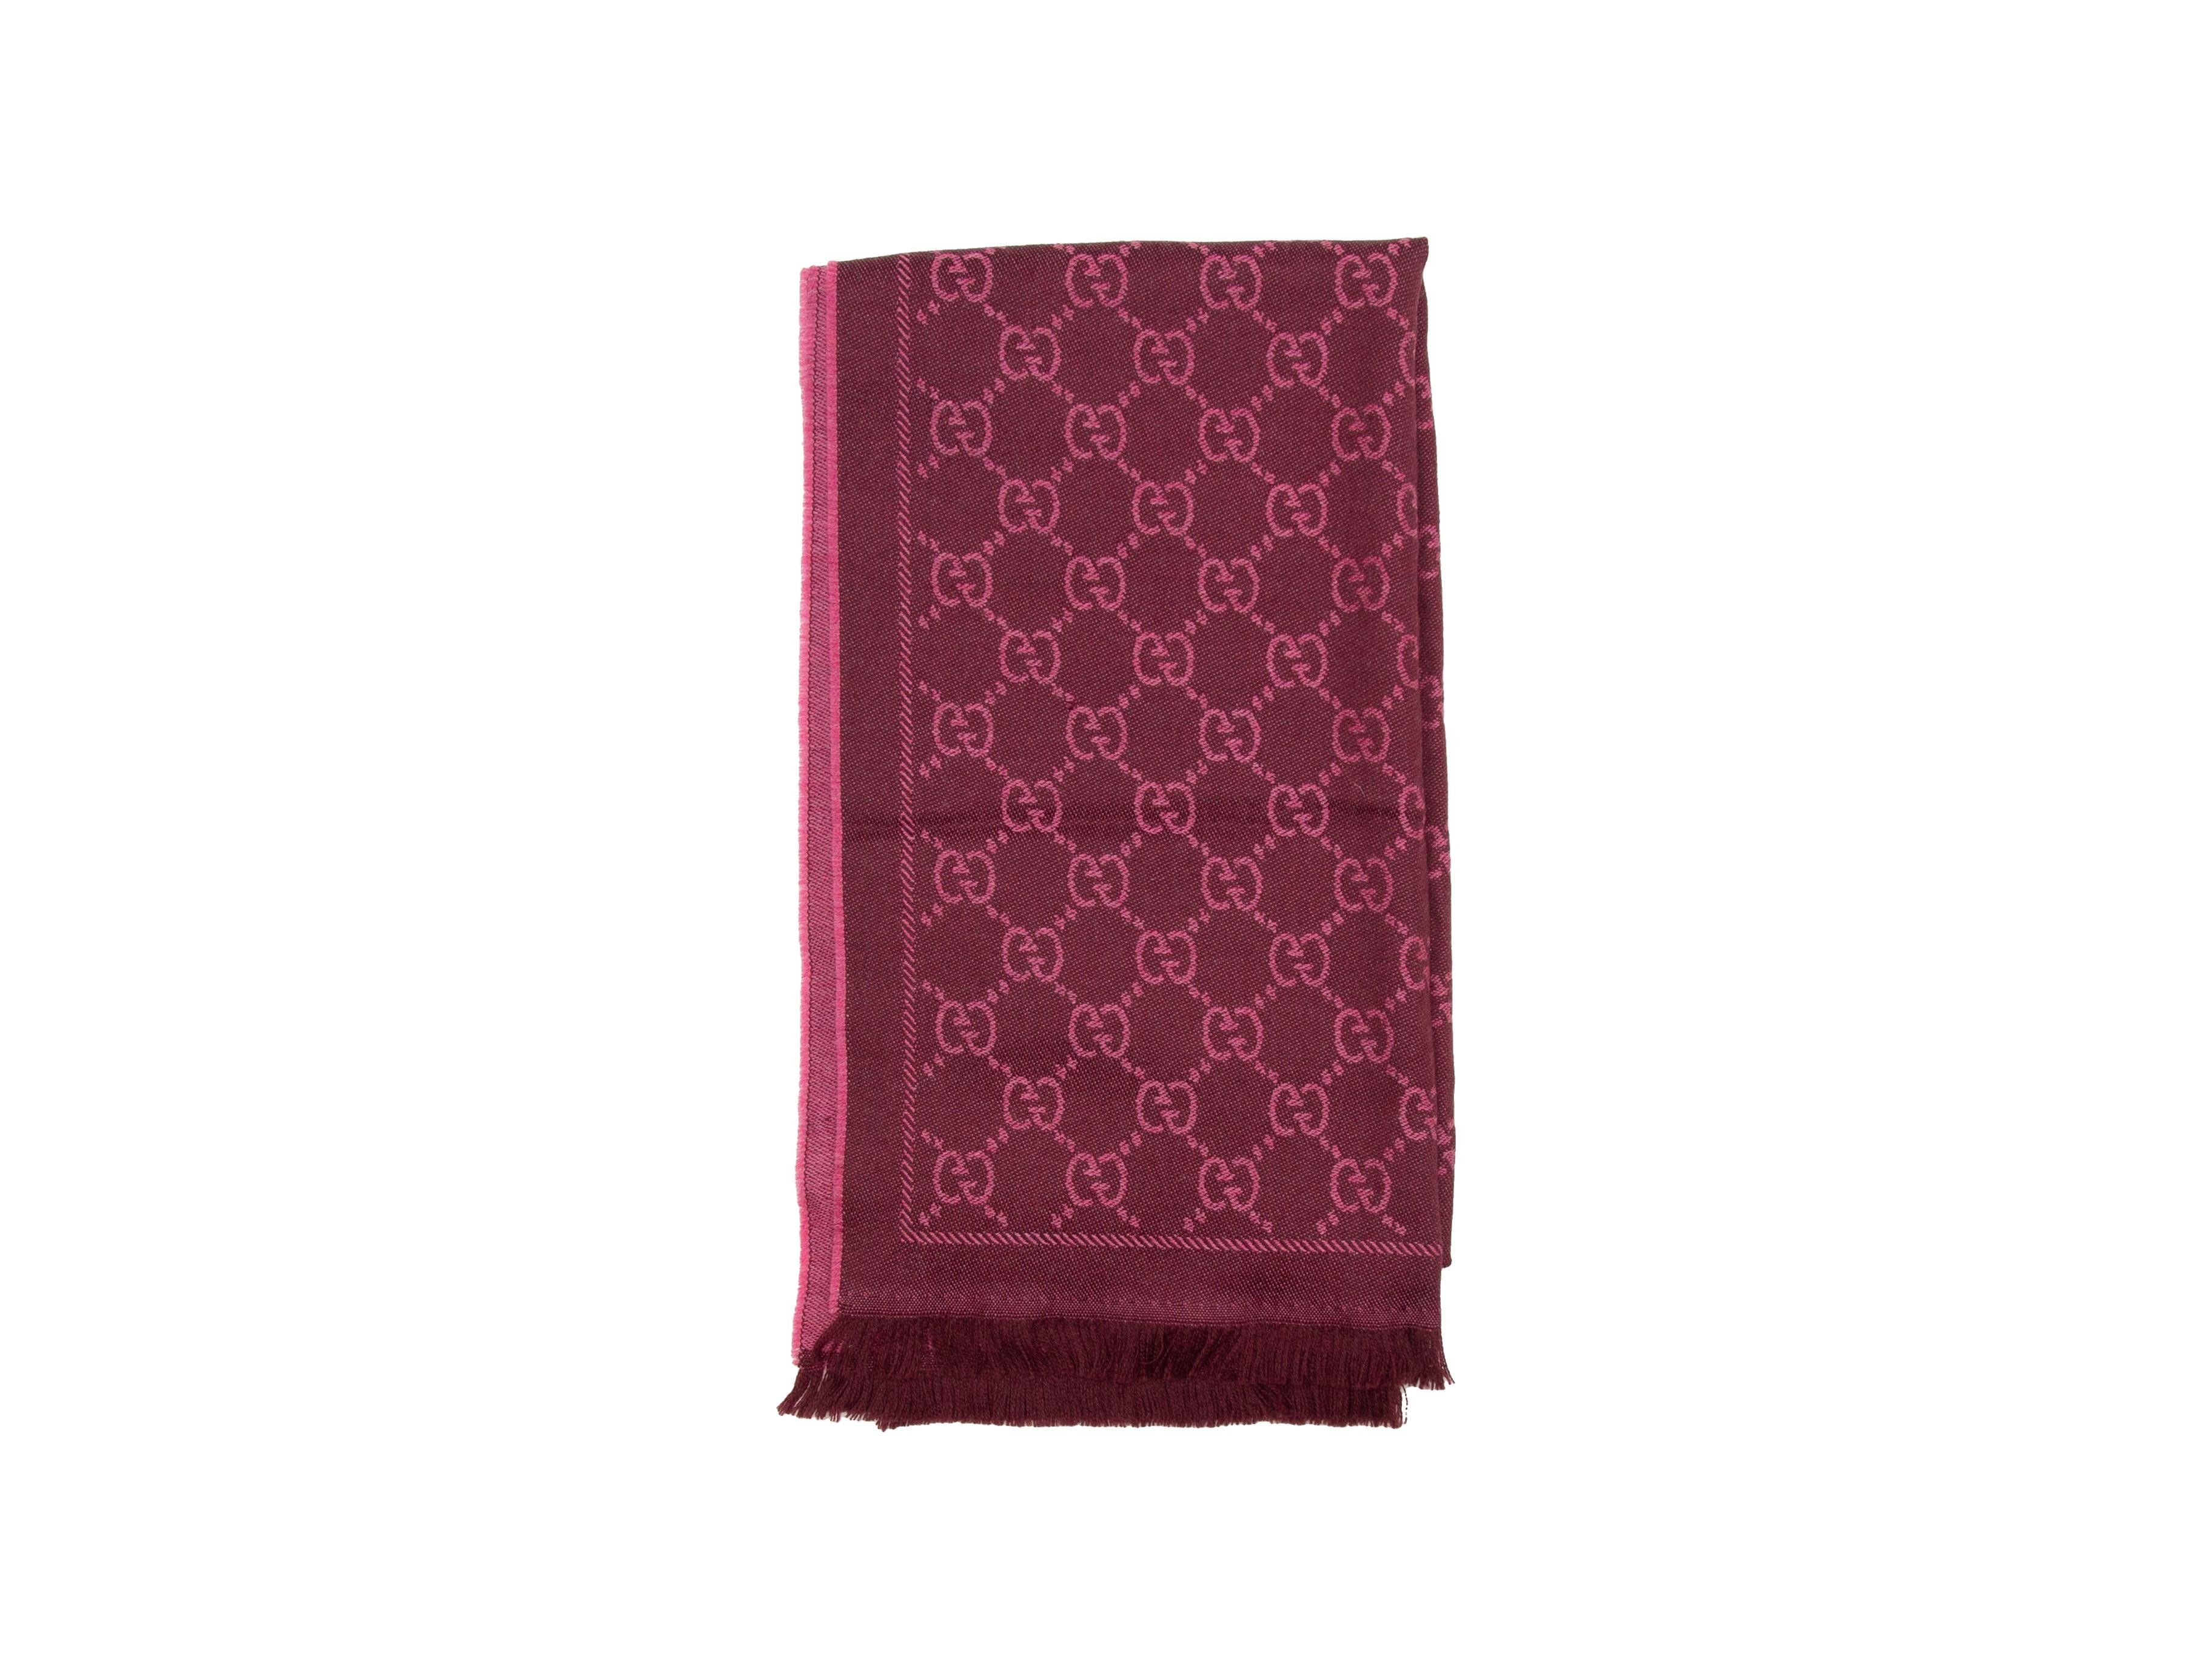 Product details: Magenta and burgundy monogram wool scarf by Gucci. Fringe trim at ends. 19.75